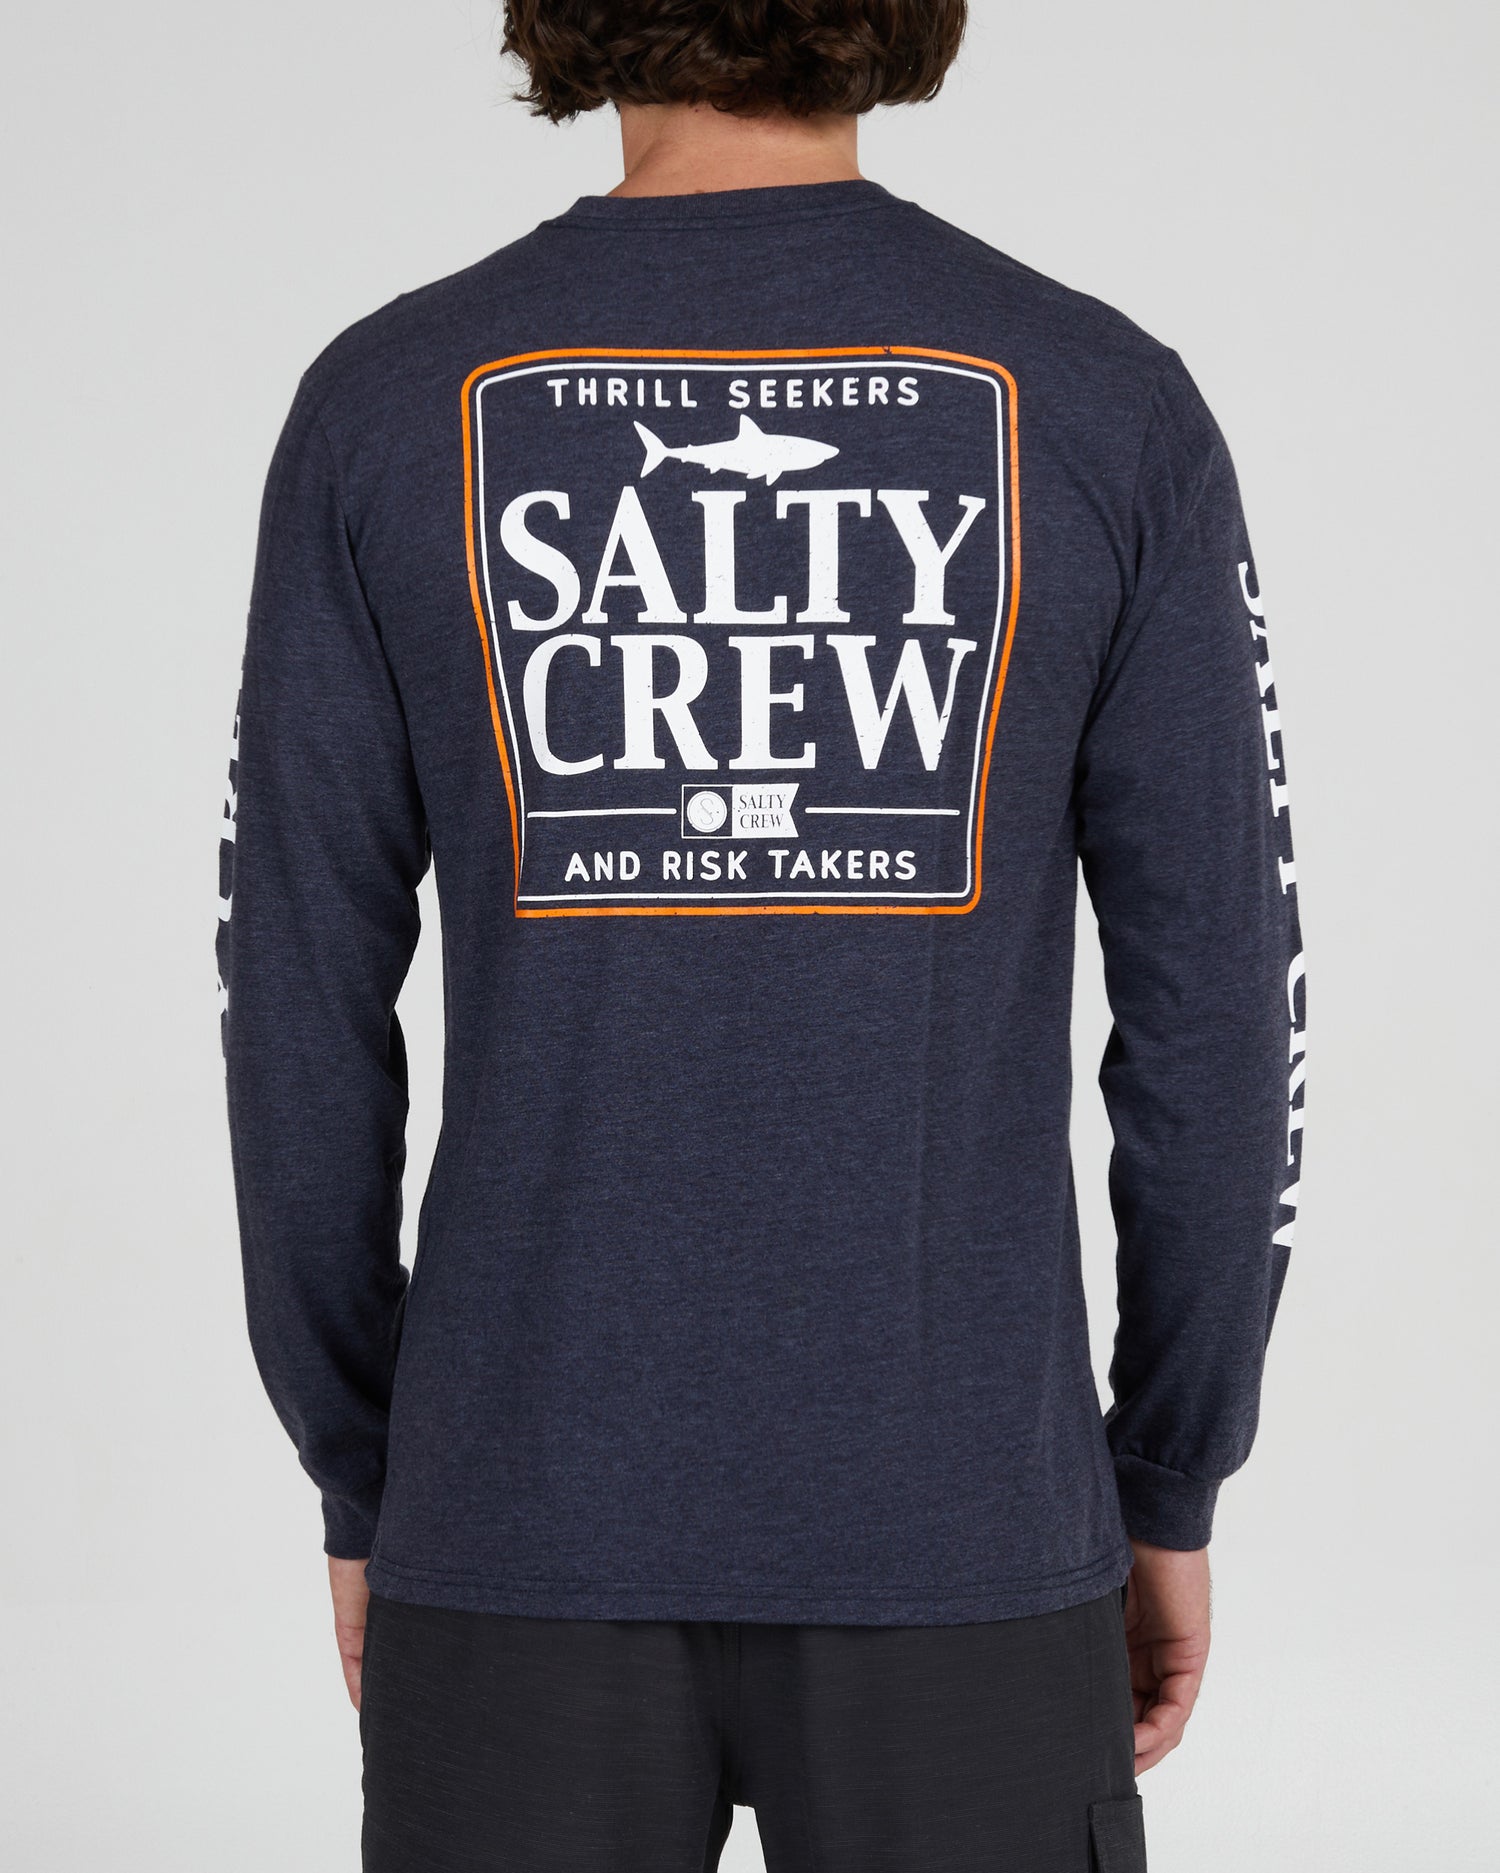 On body back of the Coaster Navy Heather L/S Premium Tee